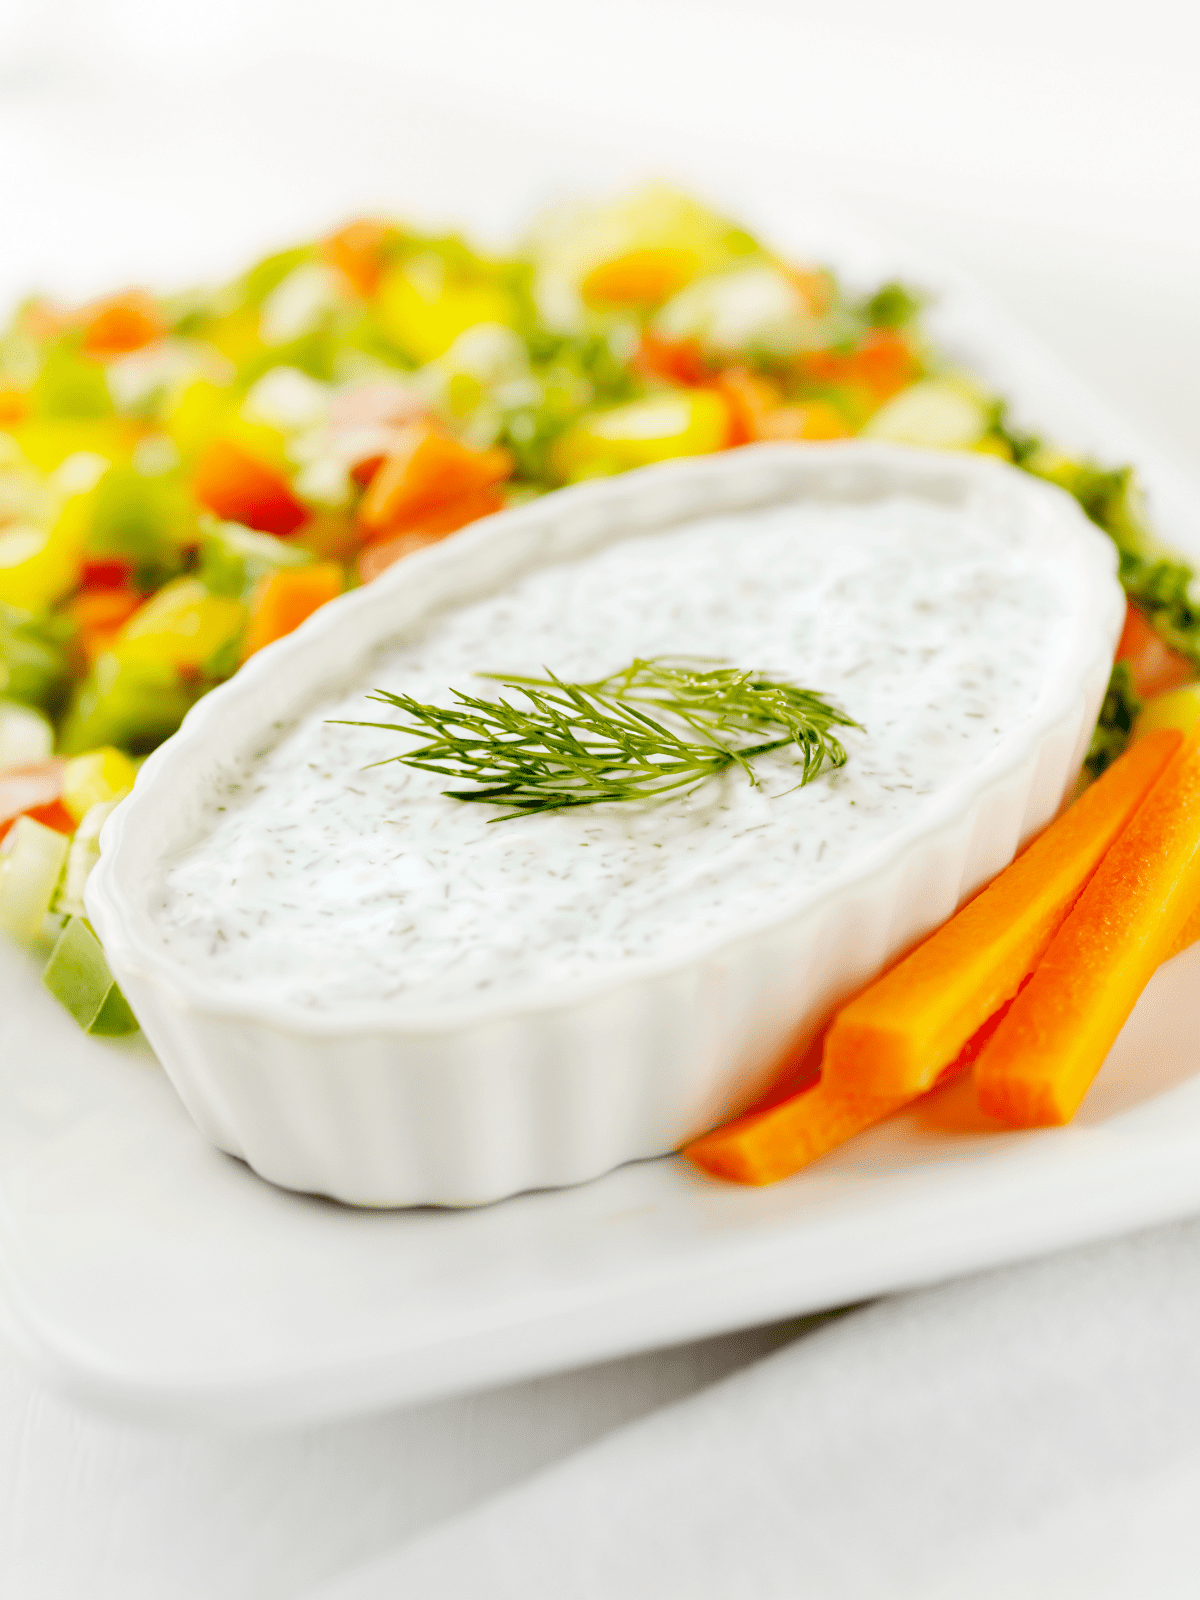 Dill dip and raw vegetables on a platter.